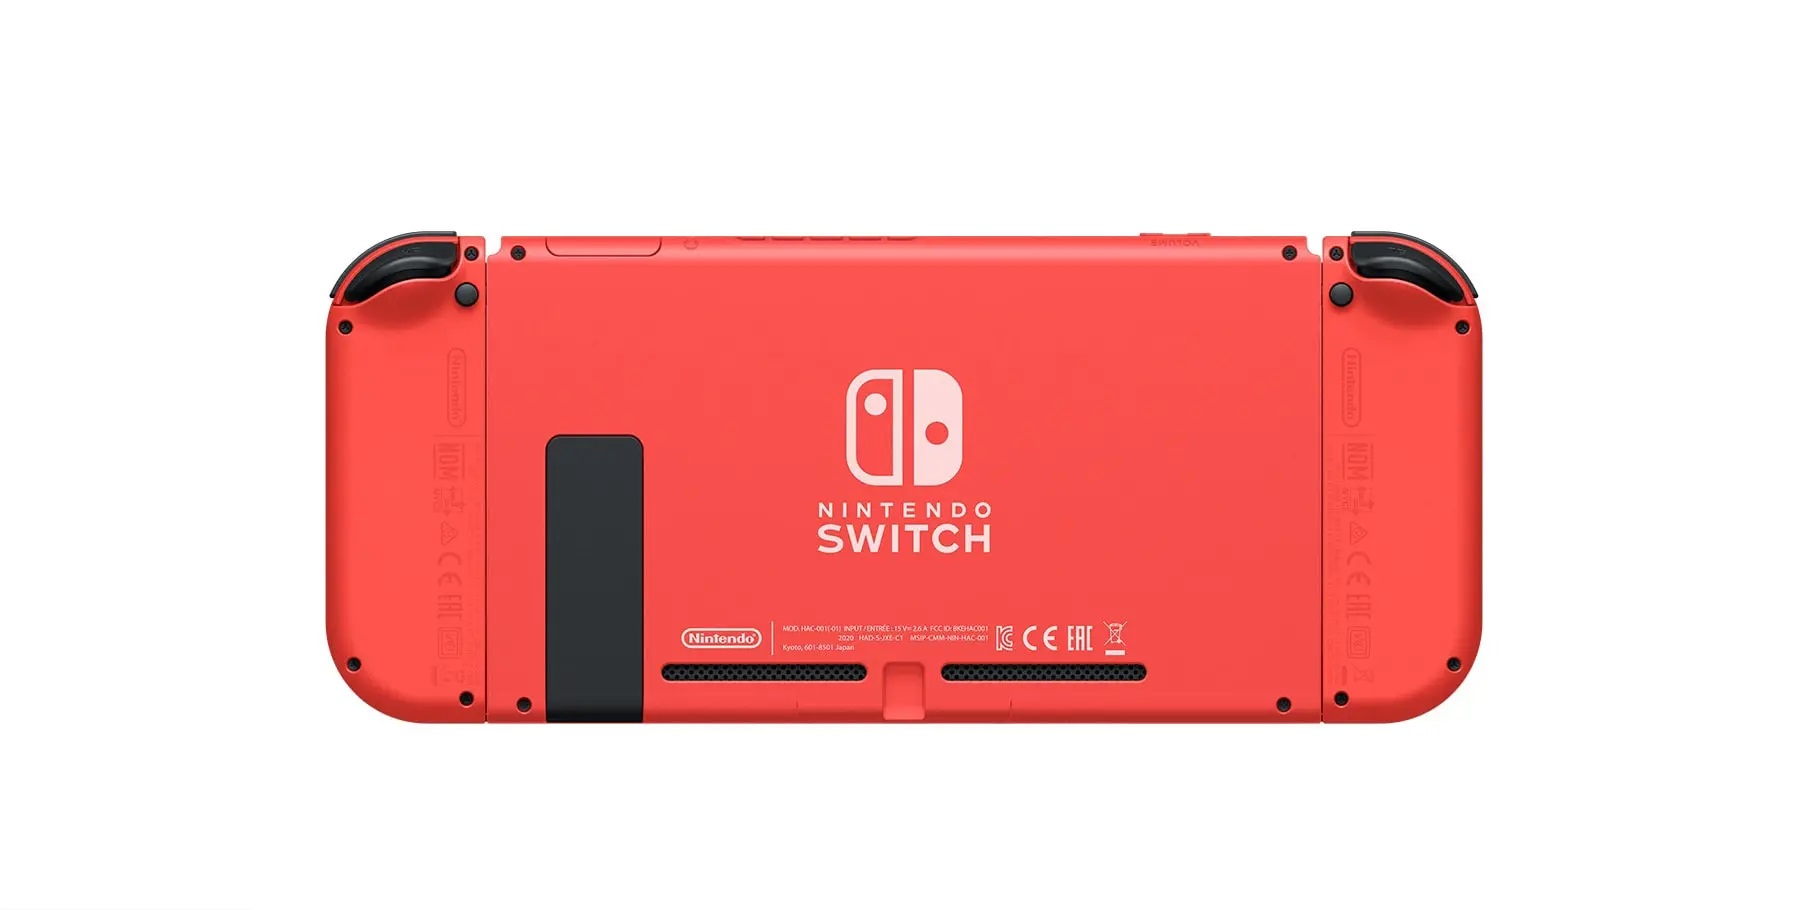 More photos of the Mario Red & Blue Edition Switch system